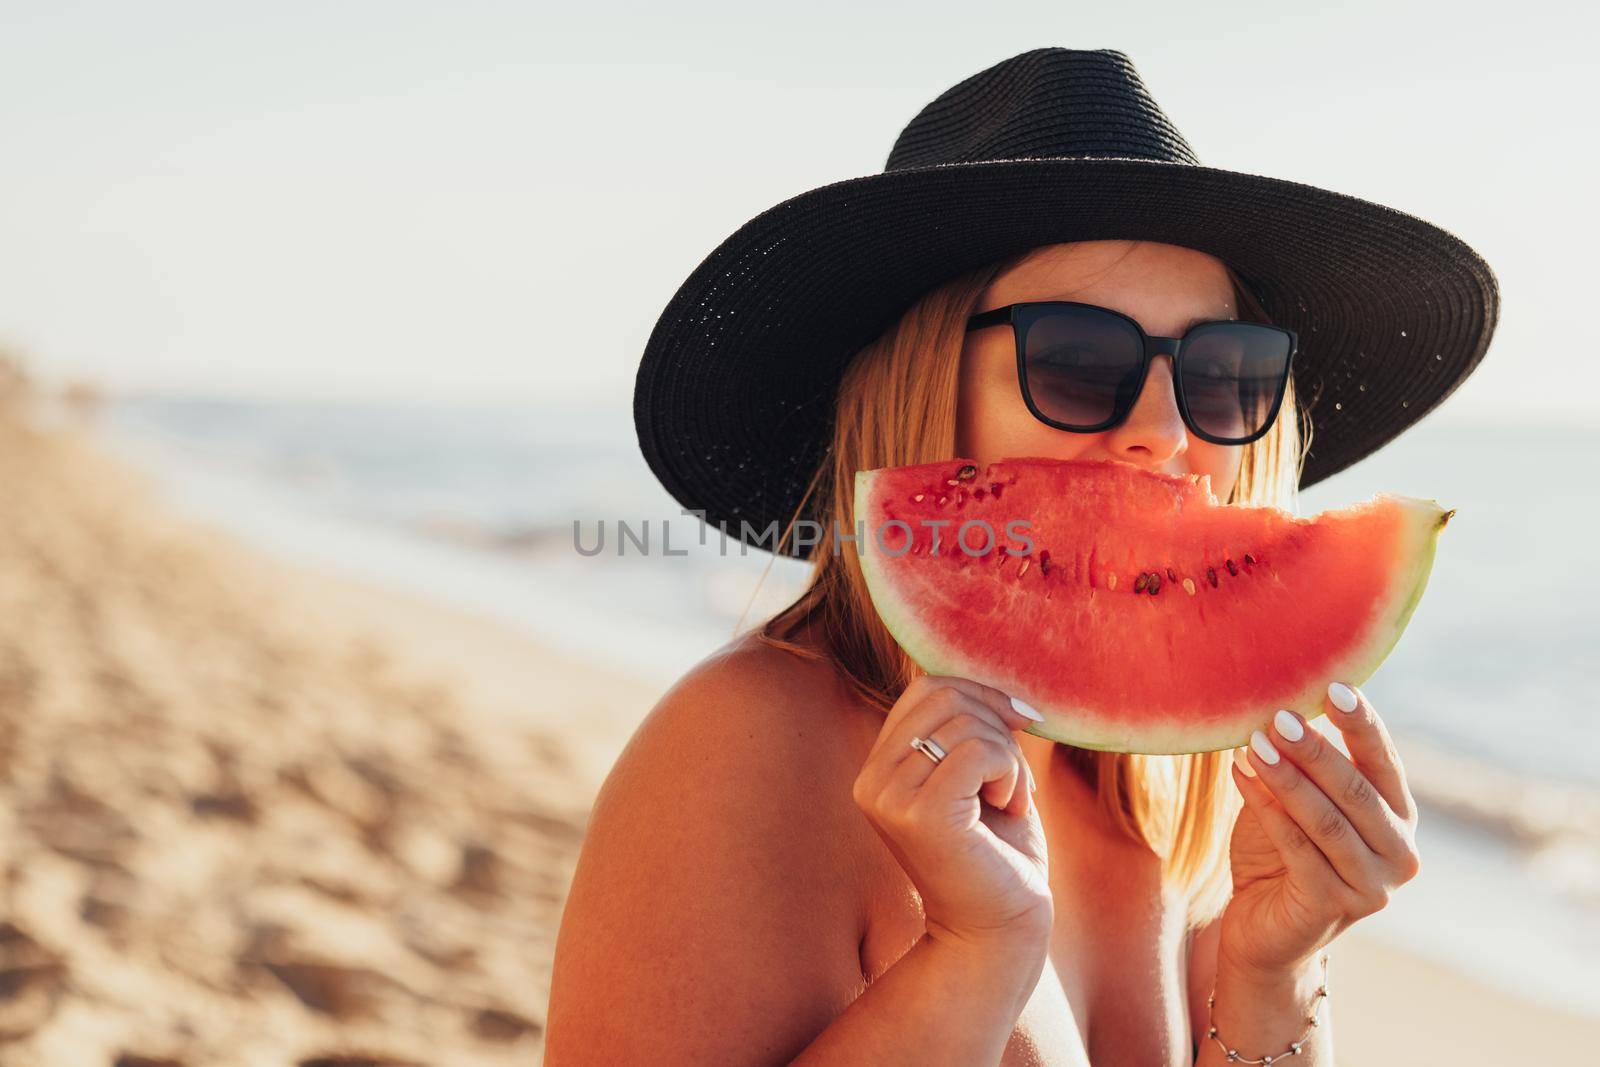 Portrait of Beautiful Young Woman in Hat and Sunglasses Cover Her Smile by Slice of Watermelon in Hands by Romvy